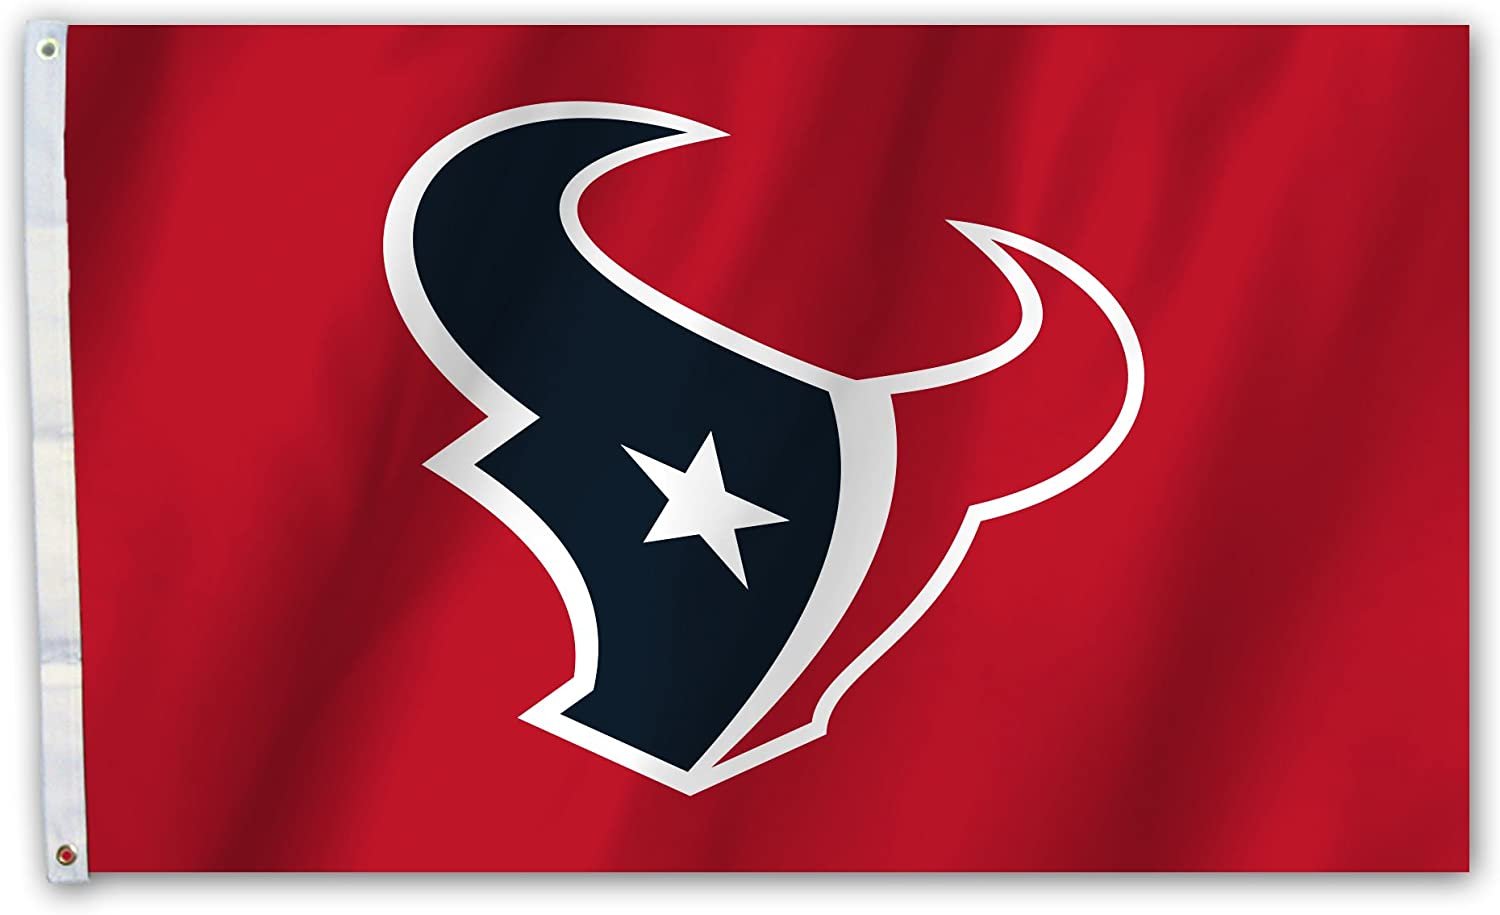 Houston Texans Premium 3x5 Feet Flag Banner, Red Design, Metal Grommets, Outdoor Use, Single Sided